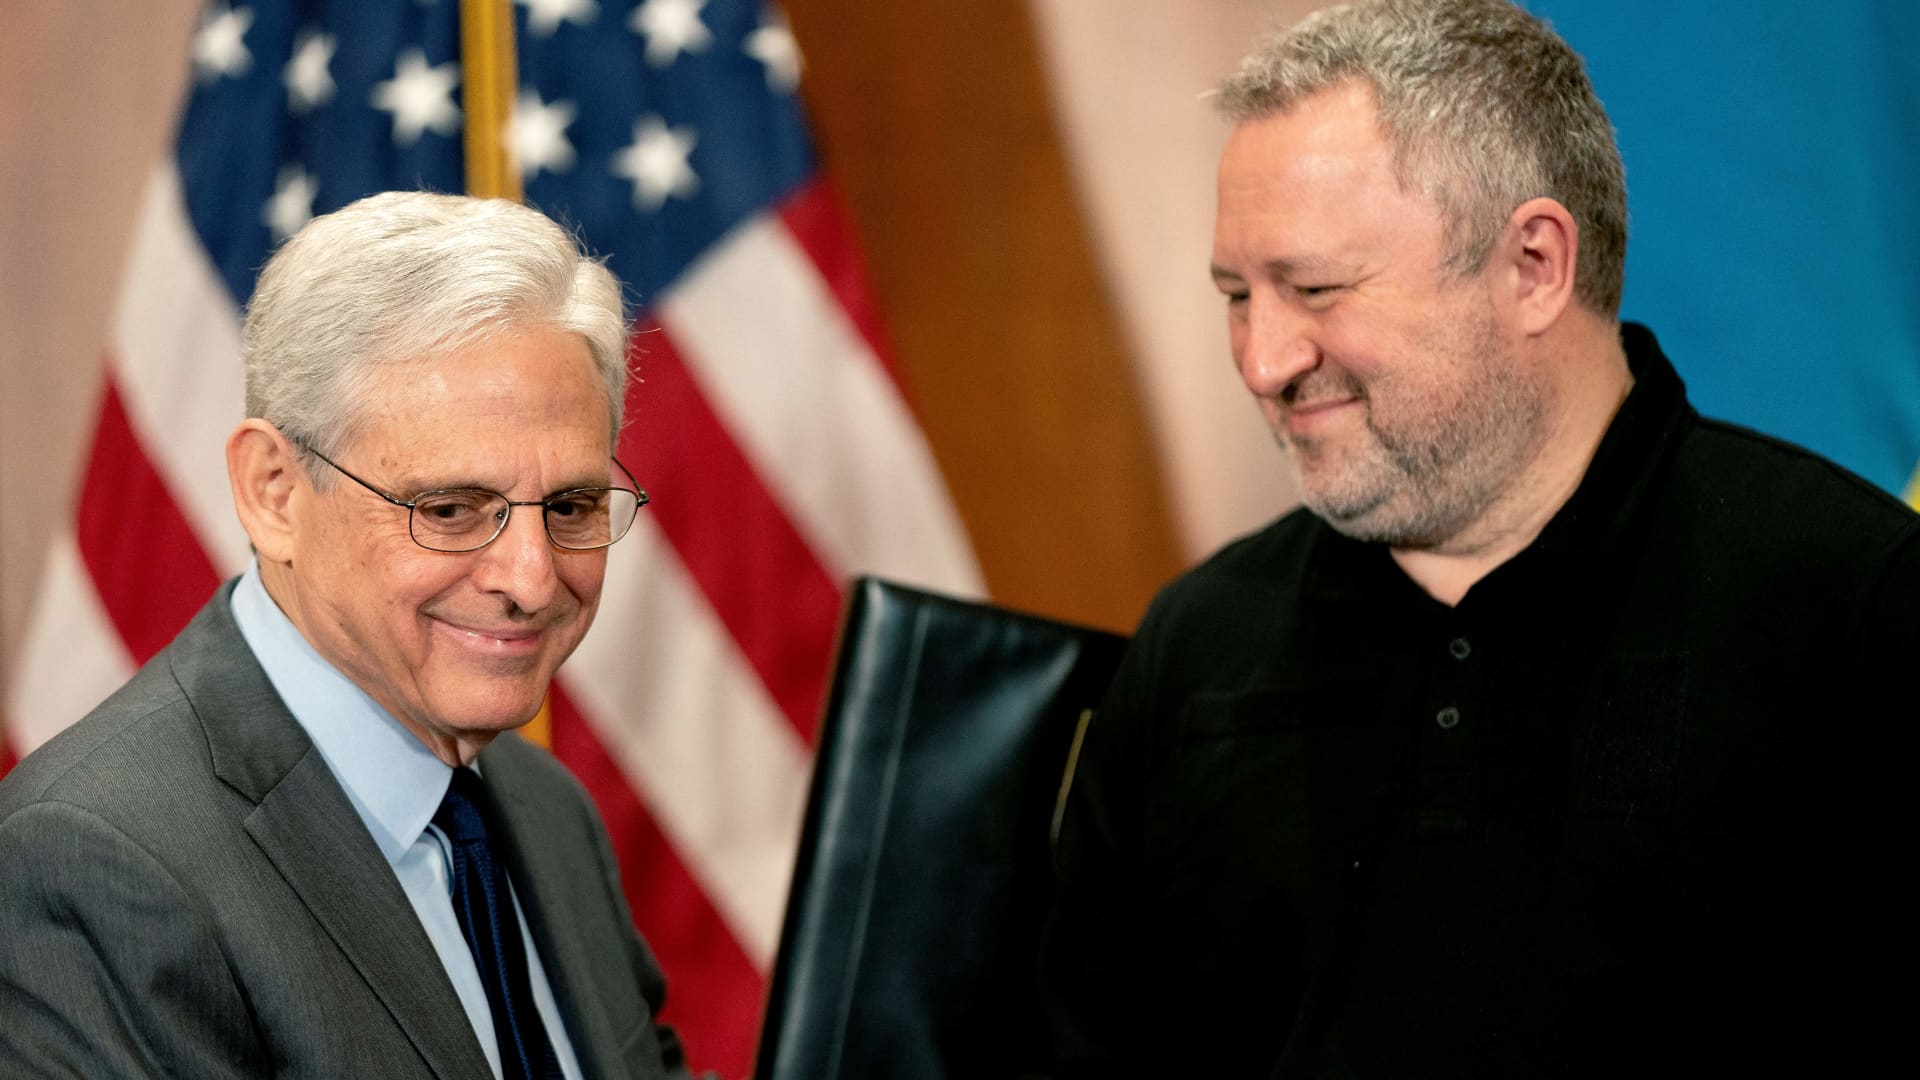 U.S. Attorney General Merrick Garland greets Ukrainian Prosecutor General Andriy Kostin during a meeting at the U.S. Department of Justice in Washington, D.C., on April 17, 2023.